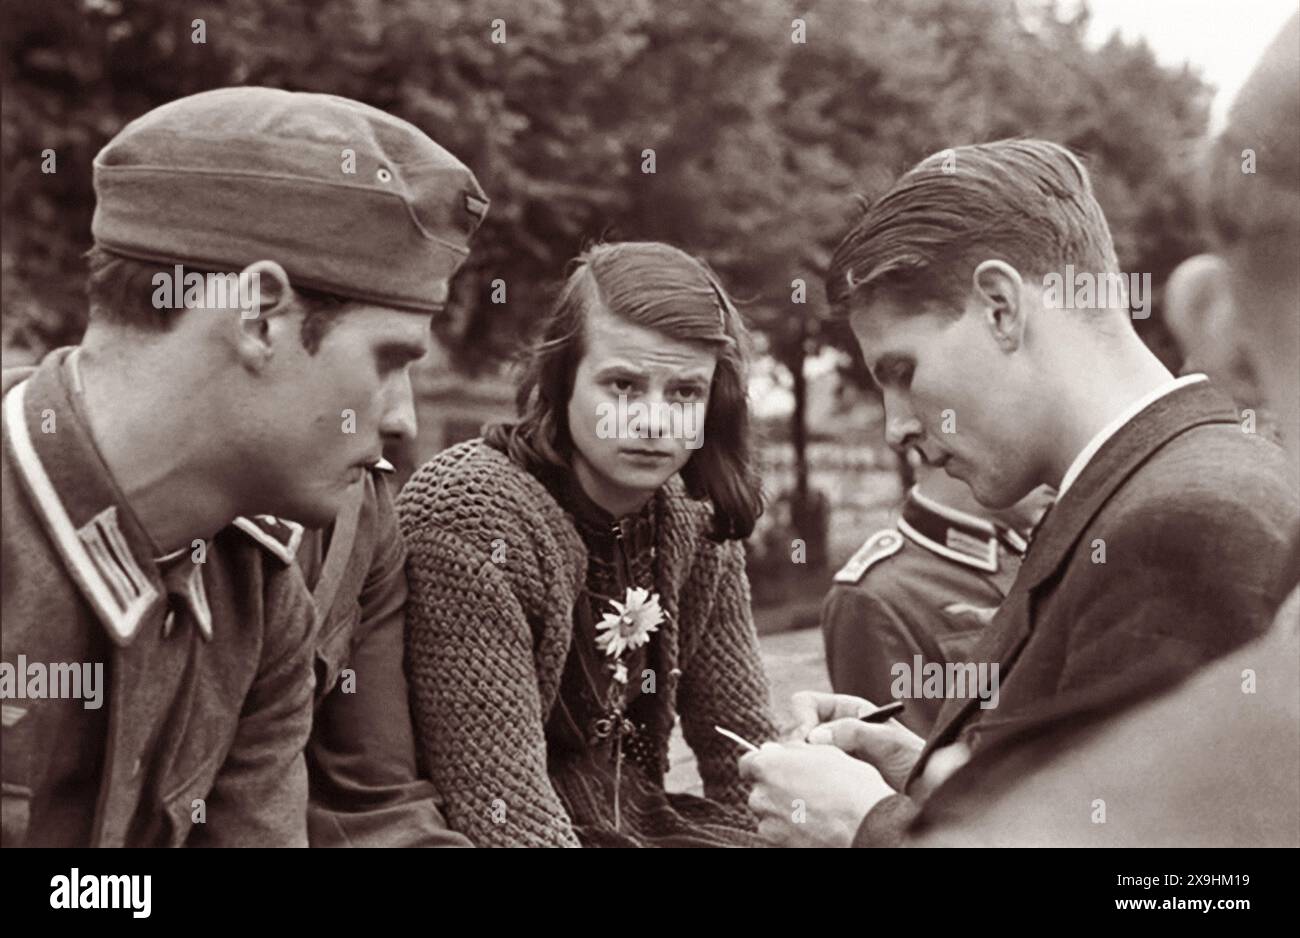 Hans Scholl (left), Sophie Scholl (middle) and Christoph Probst of the underground Nazi resistance group known as the White Rose in Munich, Germany, in 1942. On February 22, 1943, all three were executed by guillotine. Stock Photo